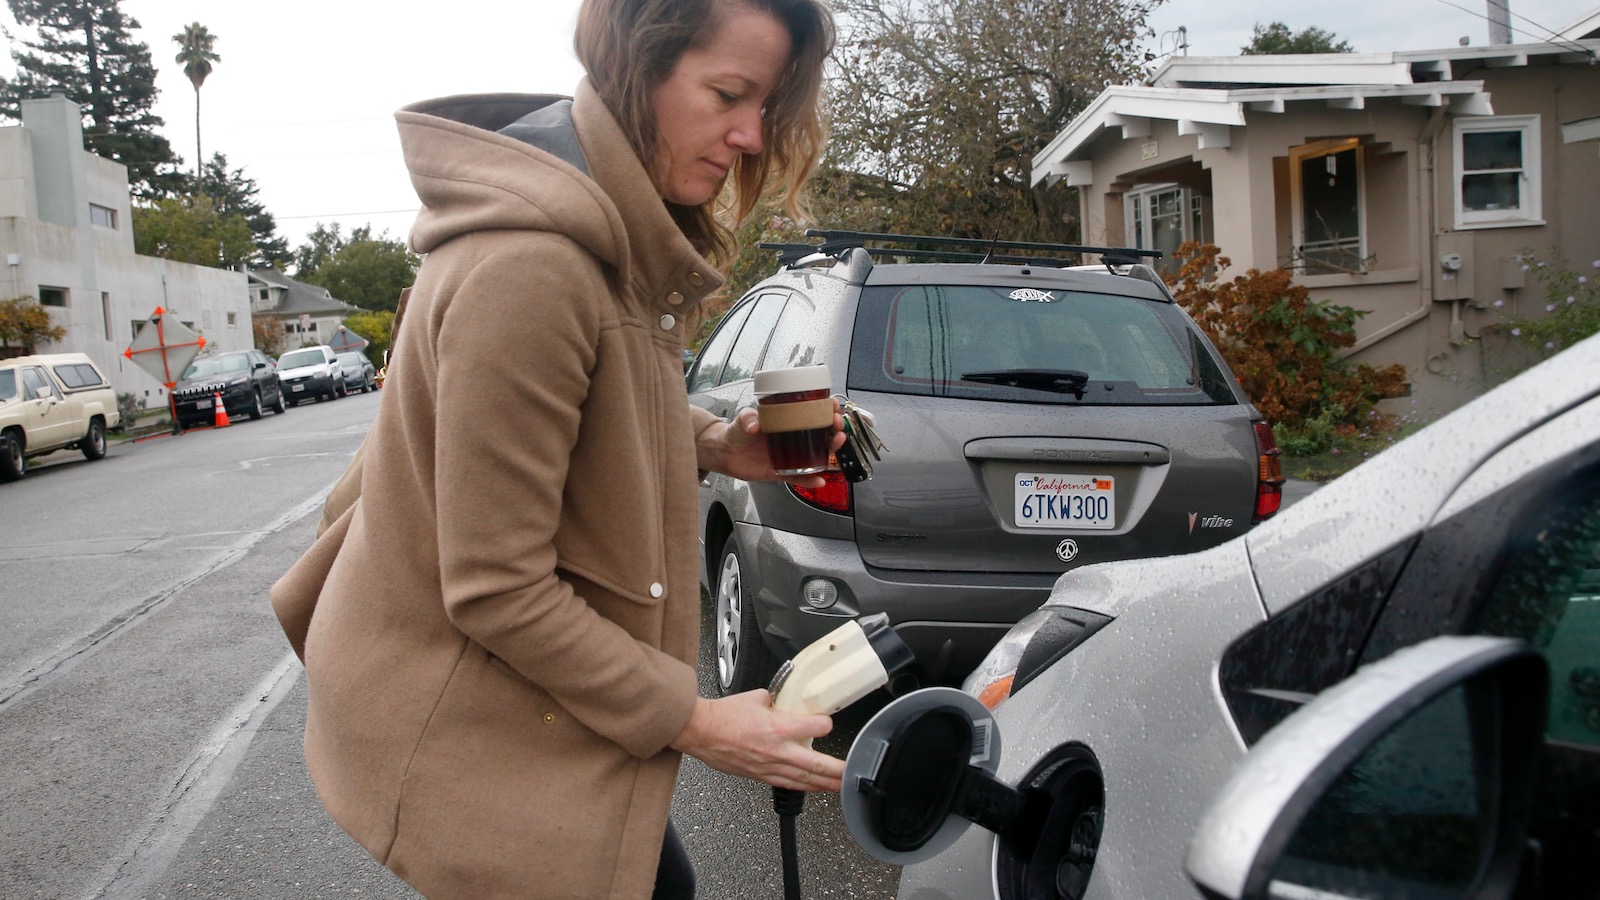 A woman in a tan coat plugs a charger into her electric vehicle, which is parked on the street outside her home in Berkeley, California